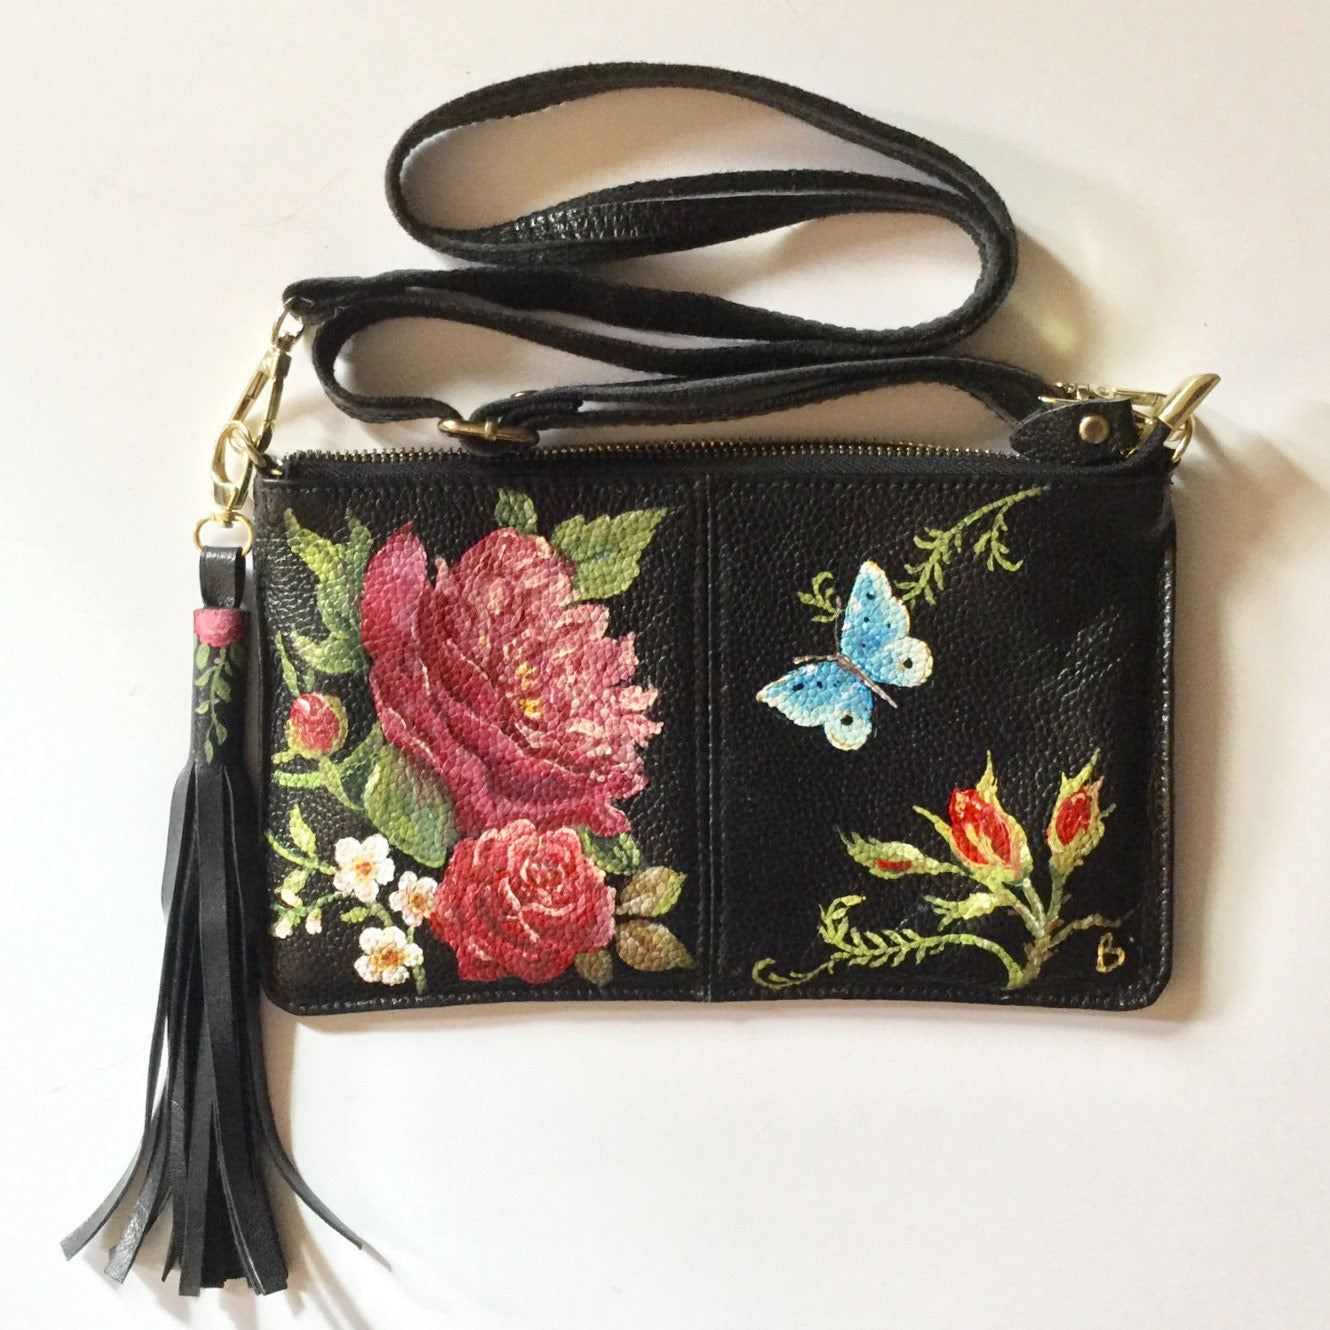 Hand-Painted Leather Cross Body Bag - Flowers